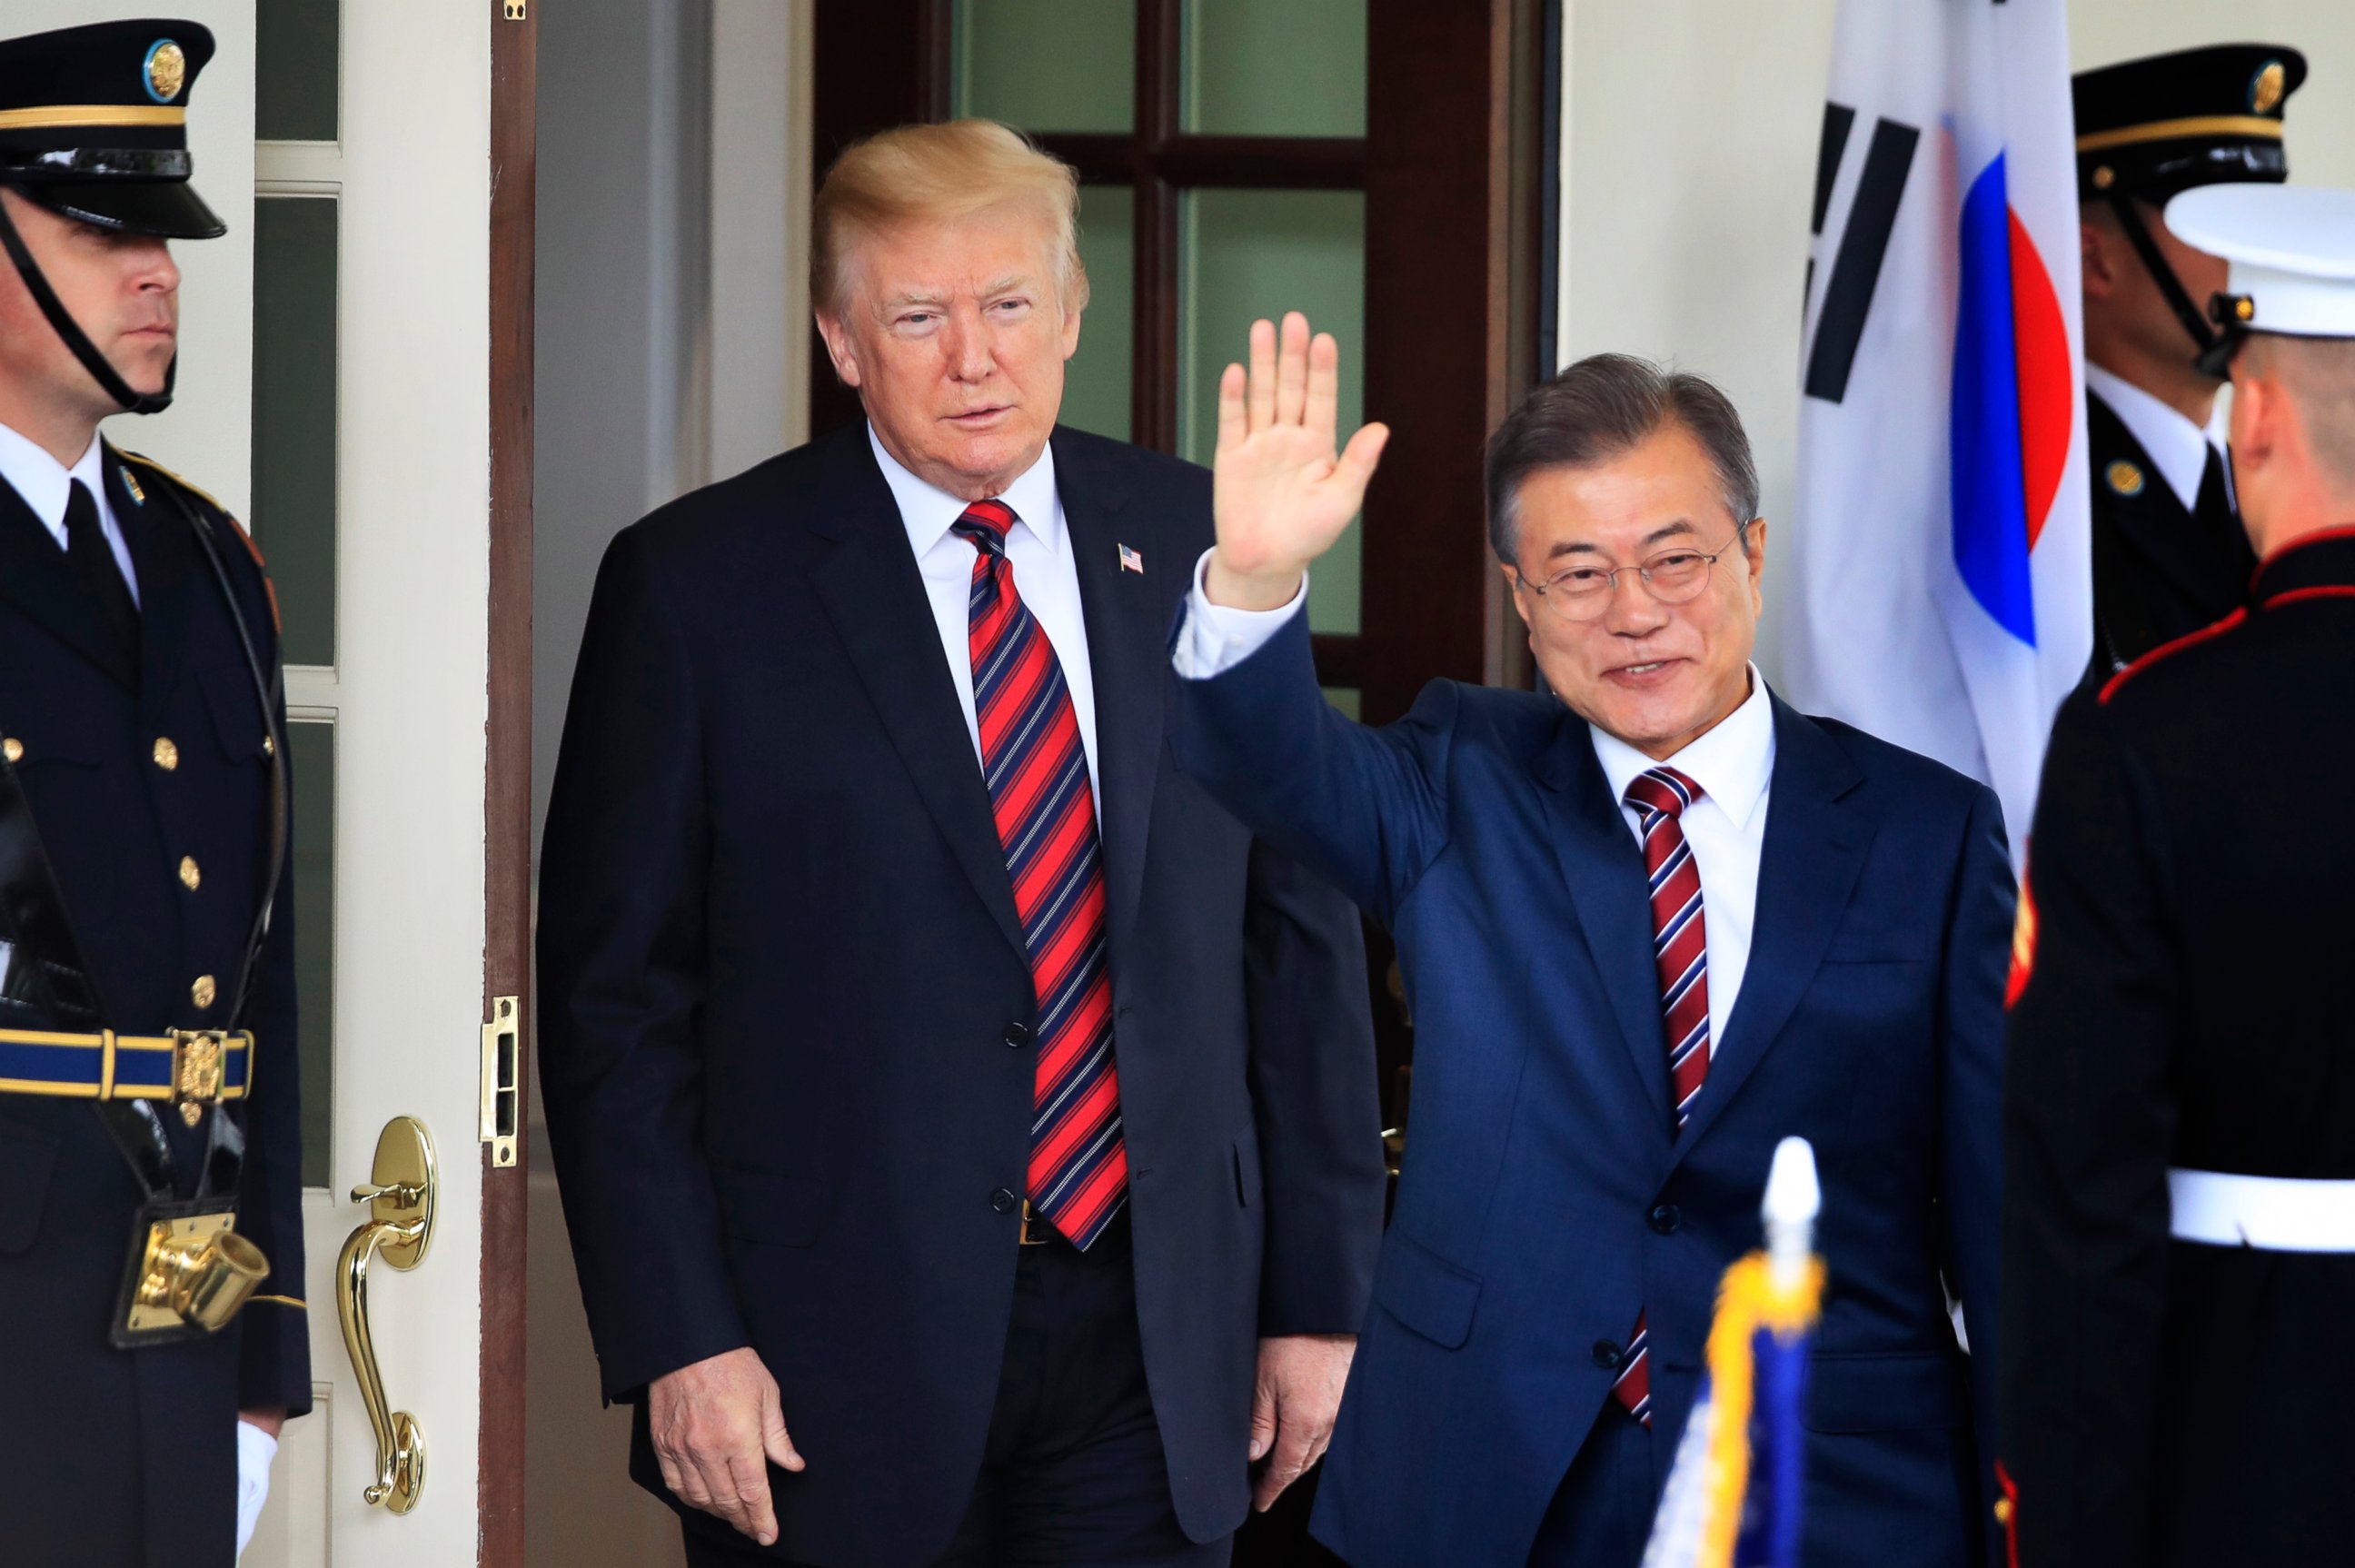 PHOTO: South Korean President Moon Jae-in waves as he is welcomed by President Donald Trump to the White House in Washington, May 22, 2018.